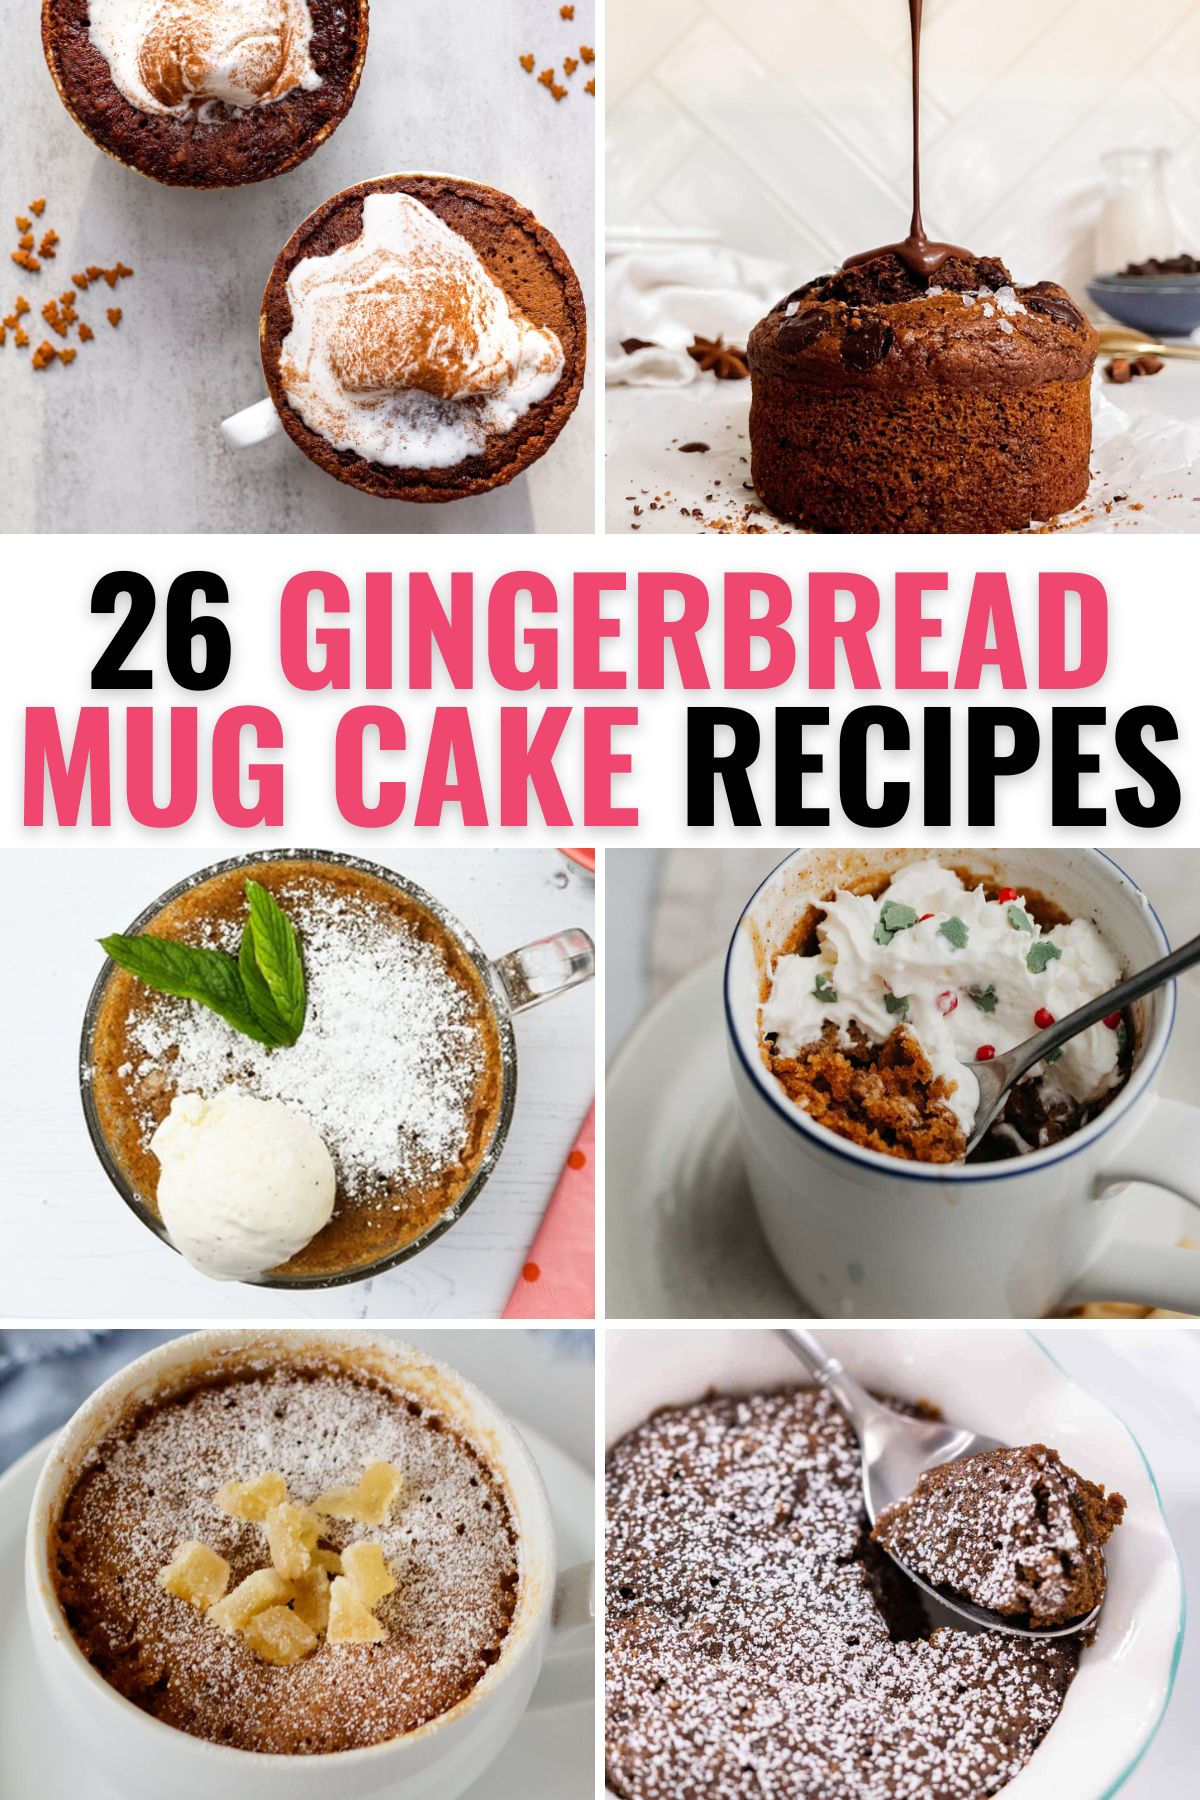 a collage of 6 images of different 5 minute mug cake with title text reading 26 Gingerbread Mug Cake Recipes.